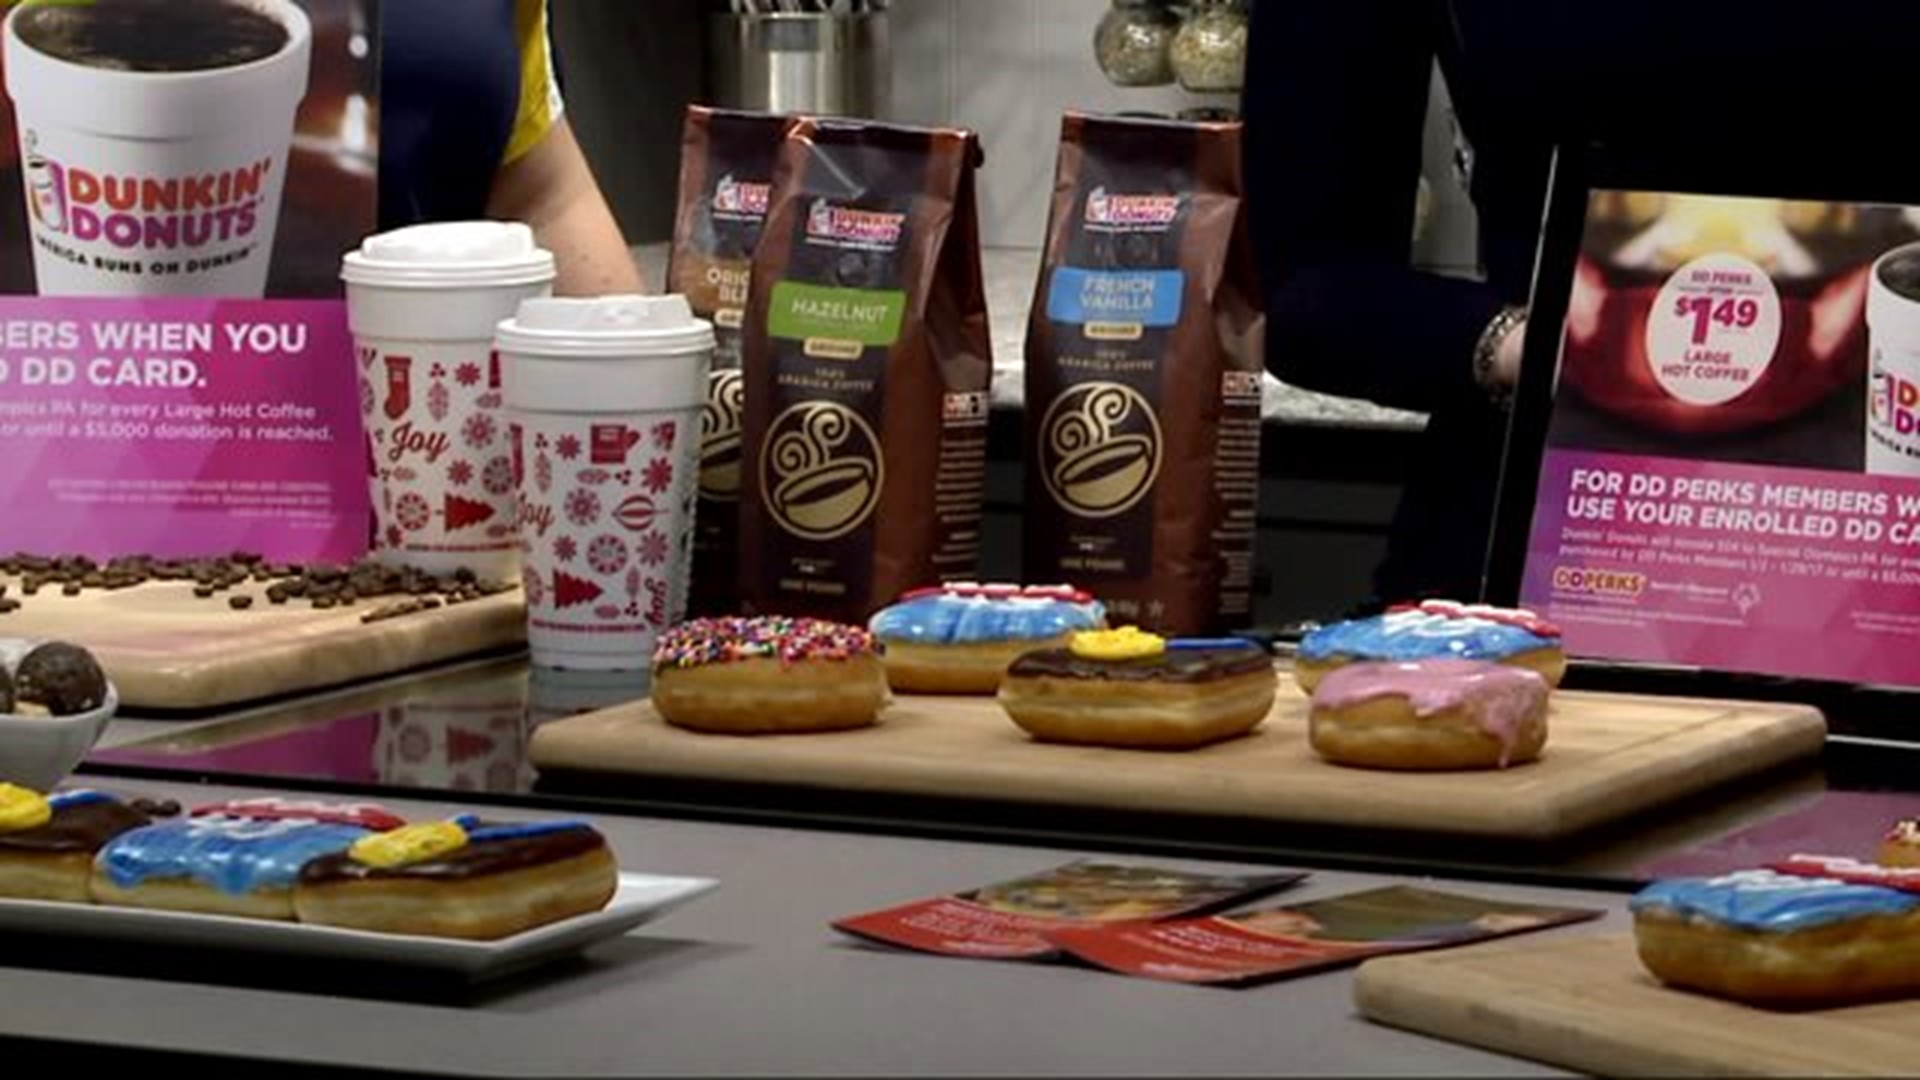 Dunkin` Donuts kicks off the New Year with their perks program